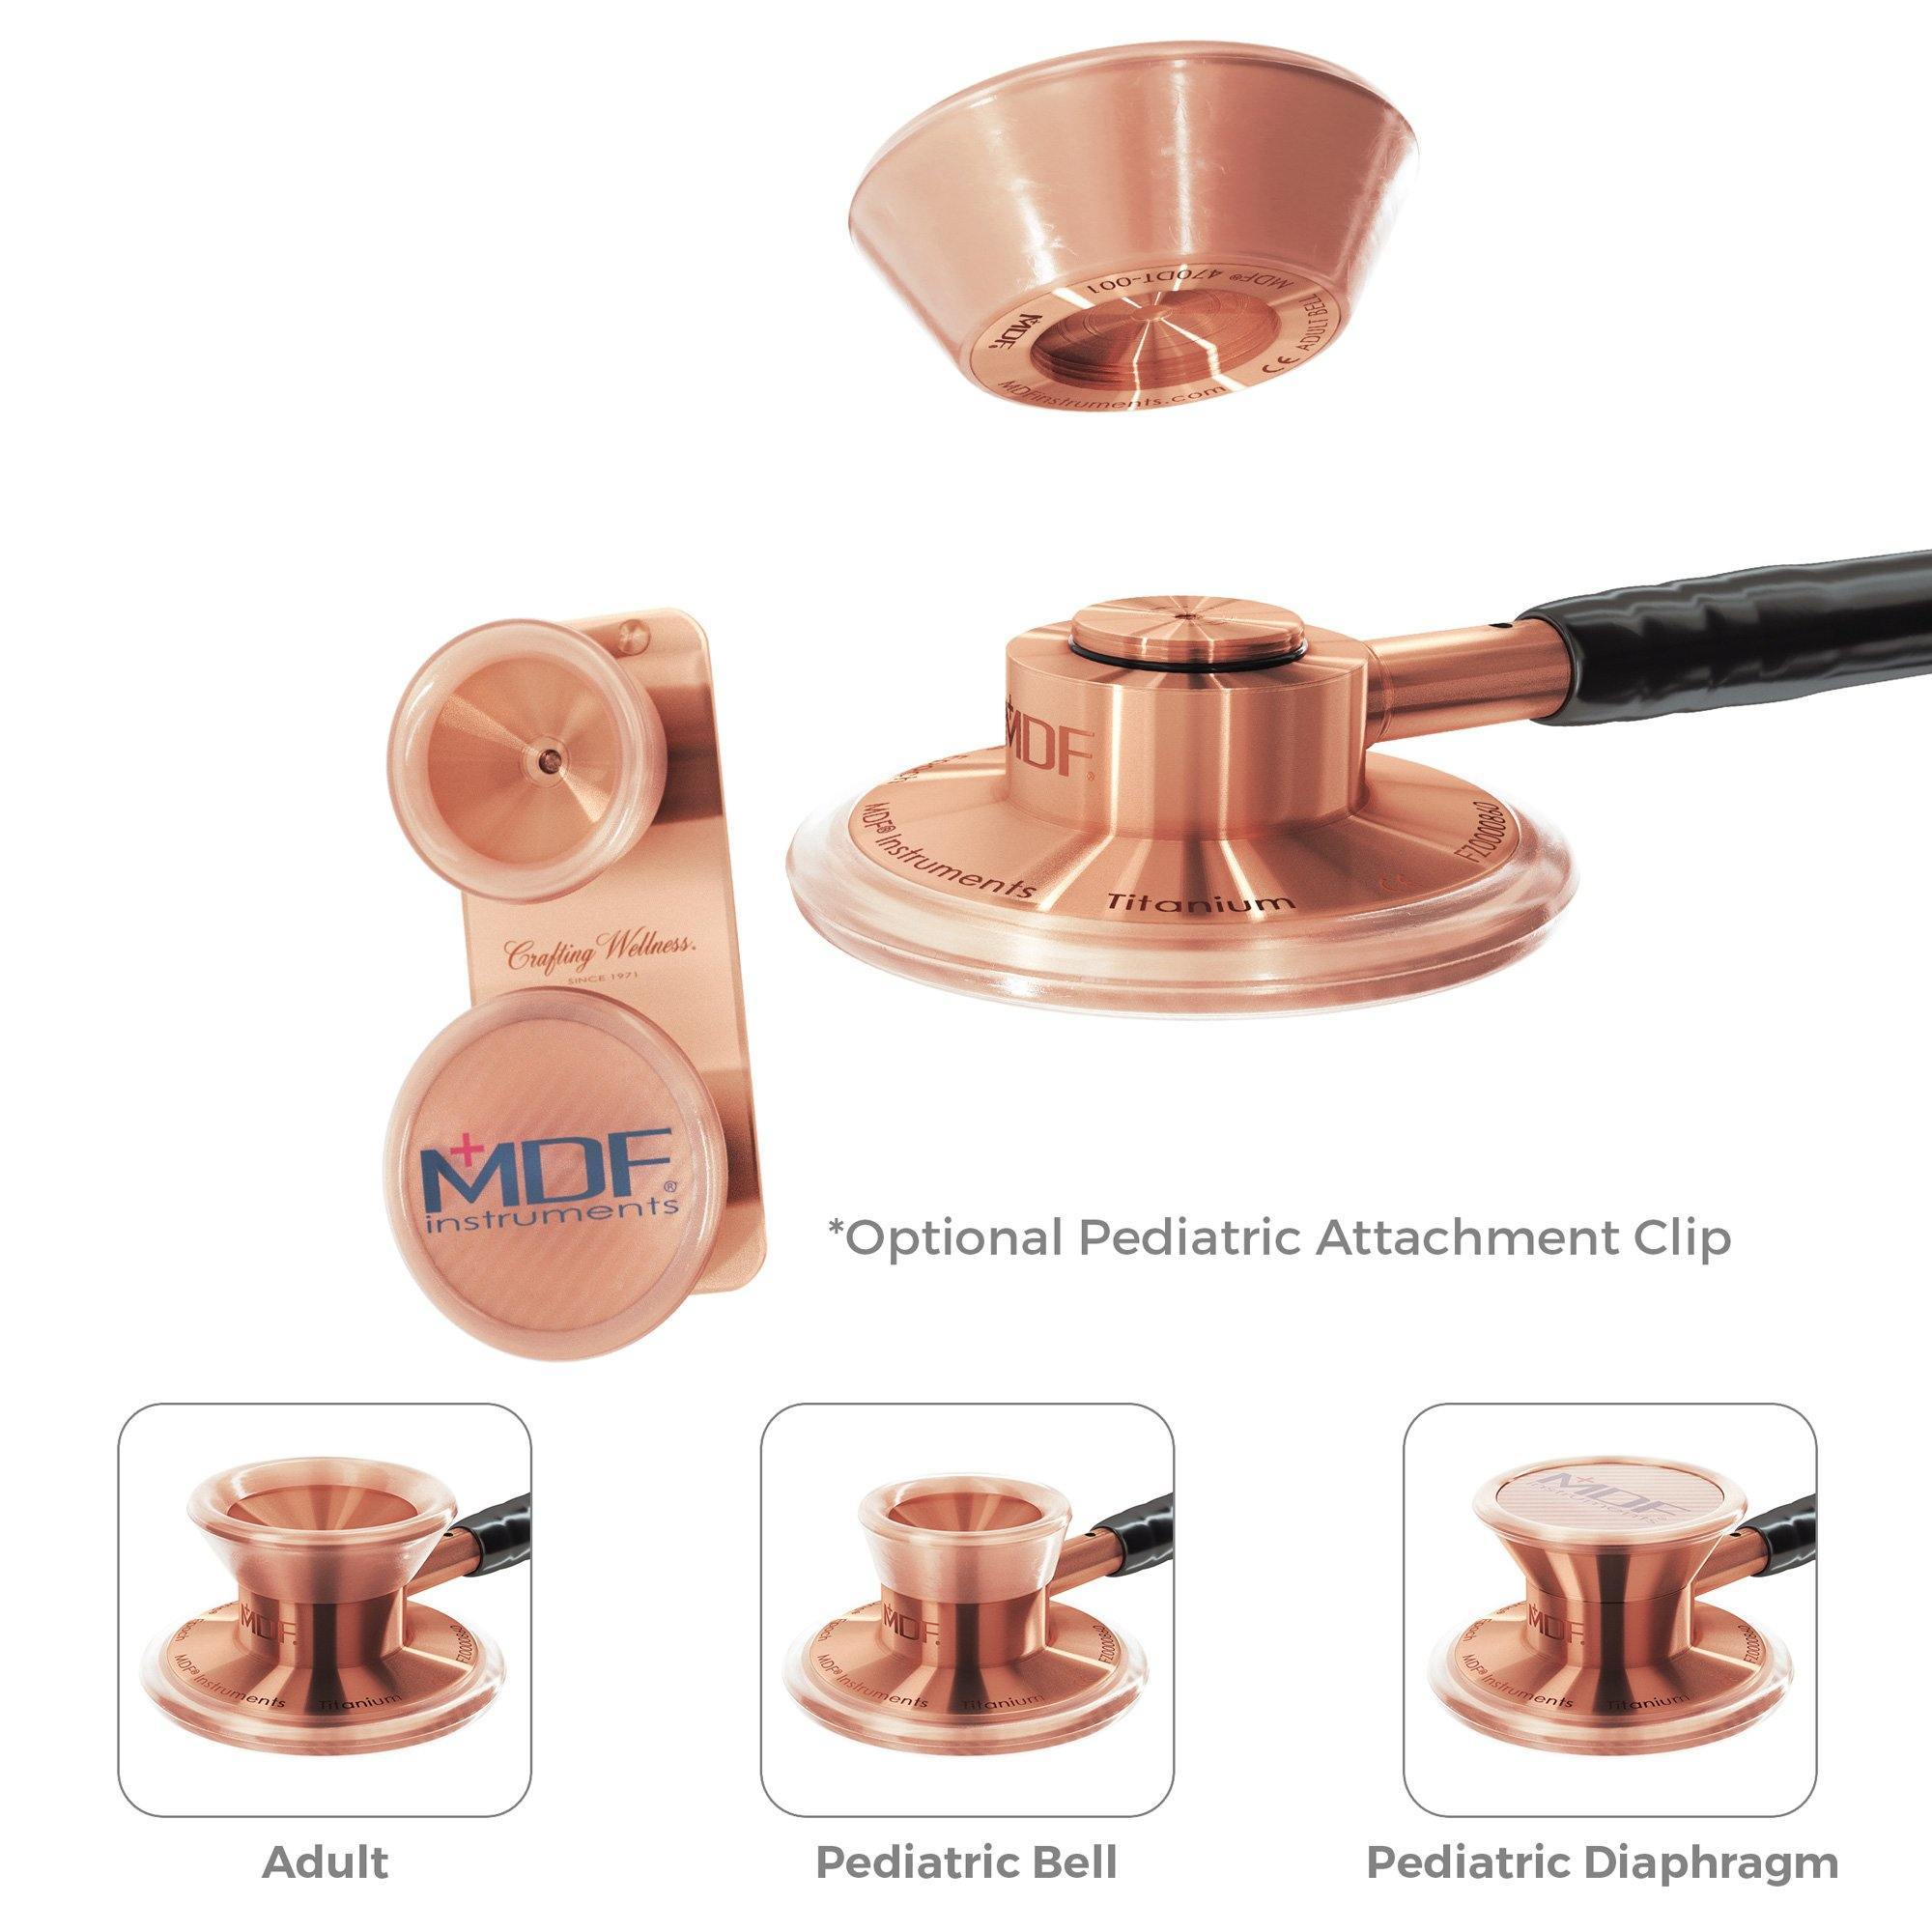 Rose Gold Stethoscope MDF Instruments MD One Epoch Titanium Attachment Clips